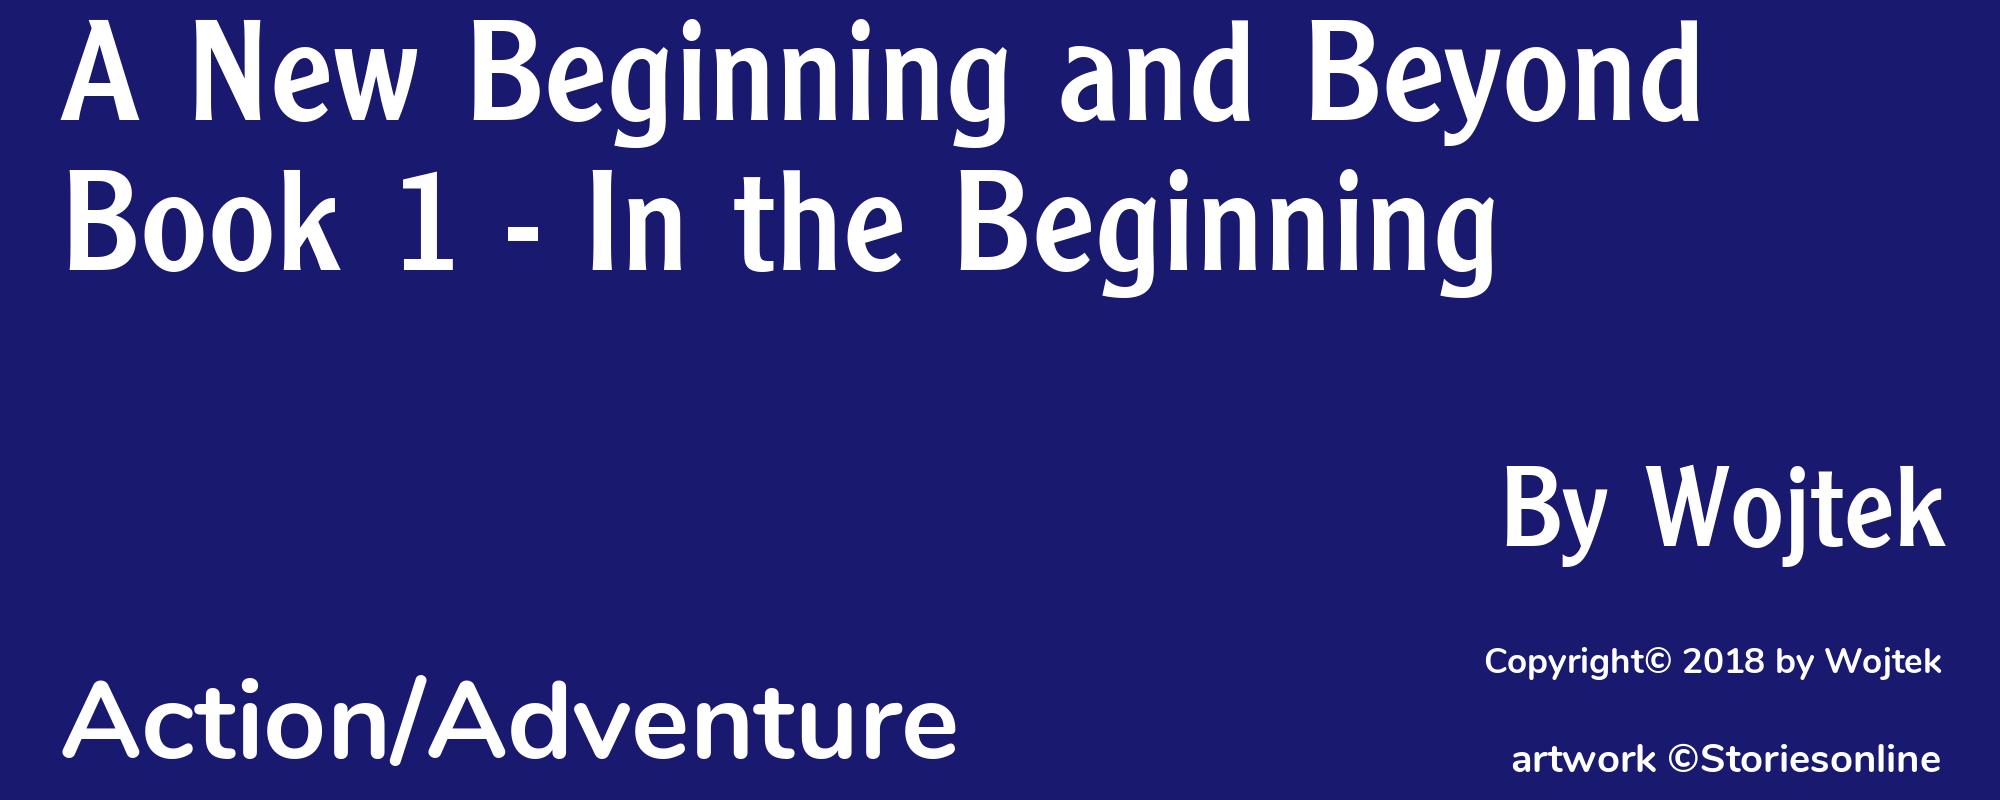 A New Beginning and Beyond Book 1 - In the Beginning - Cover